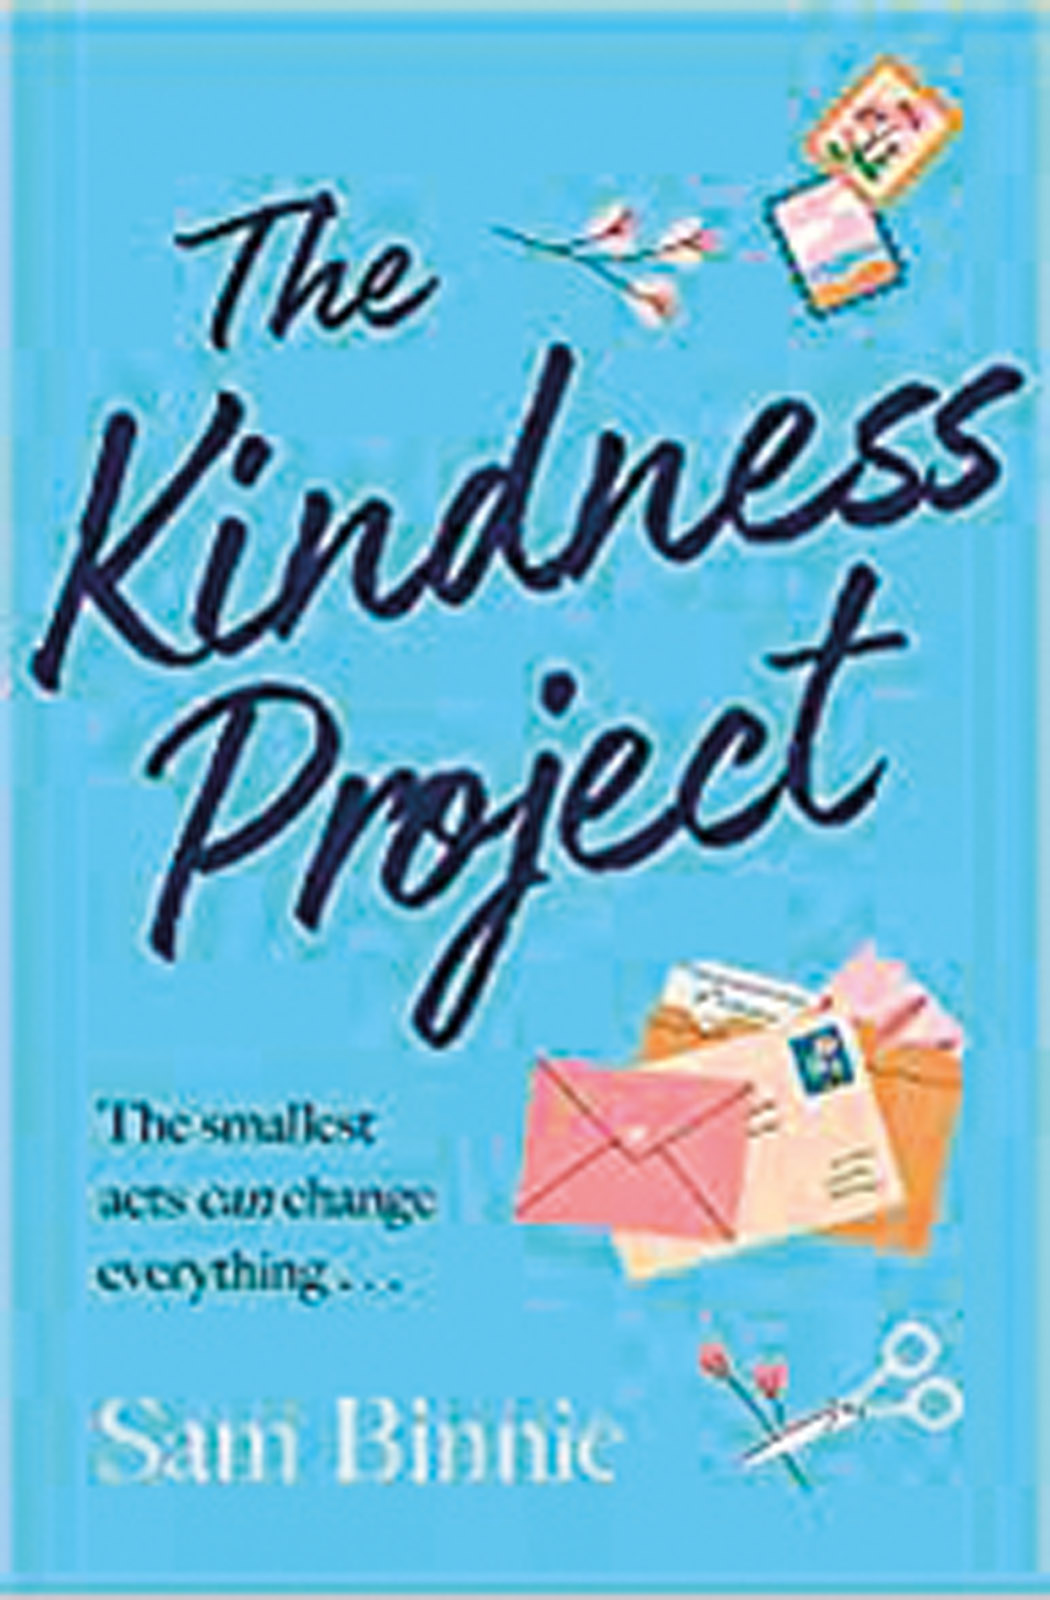 Cover: The Kindness Project, by Sam Binnie